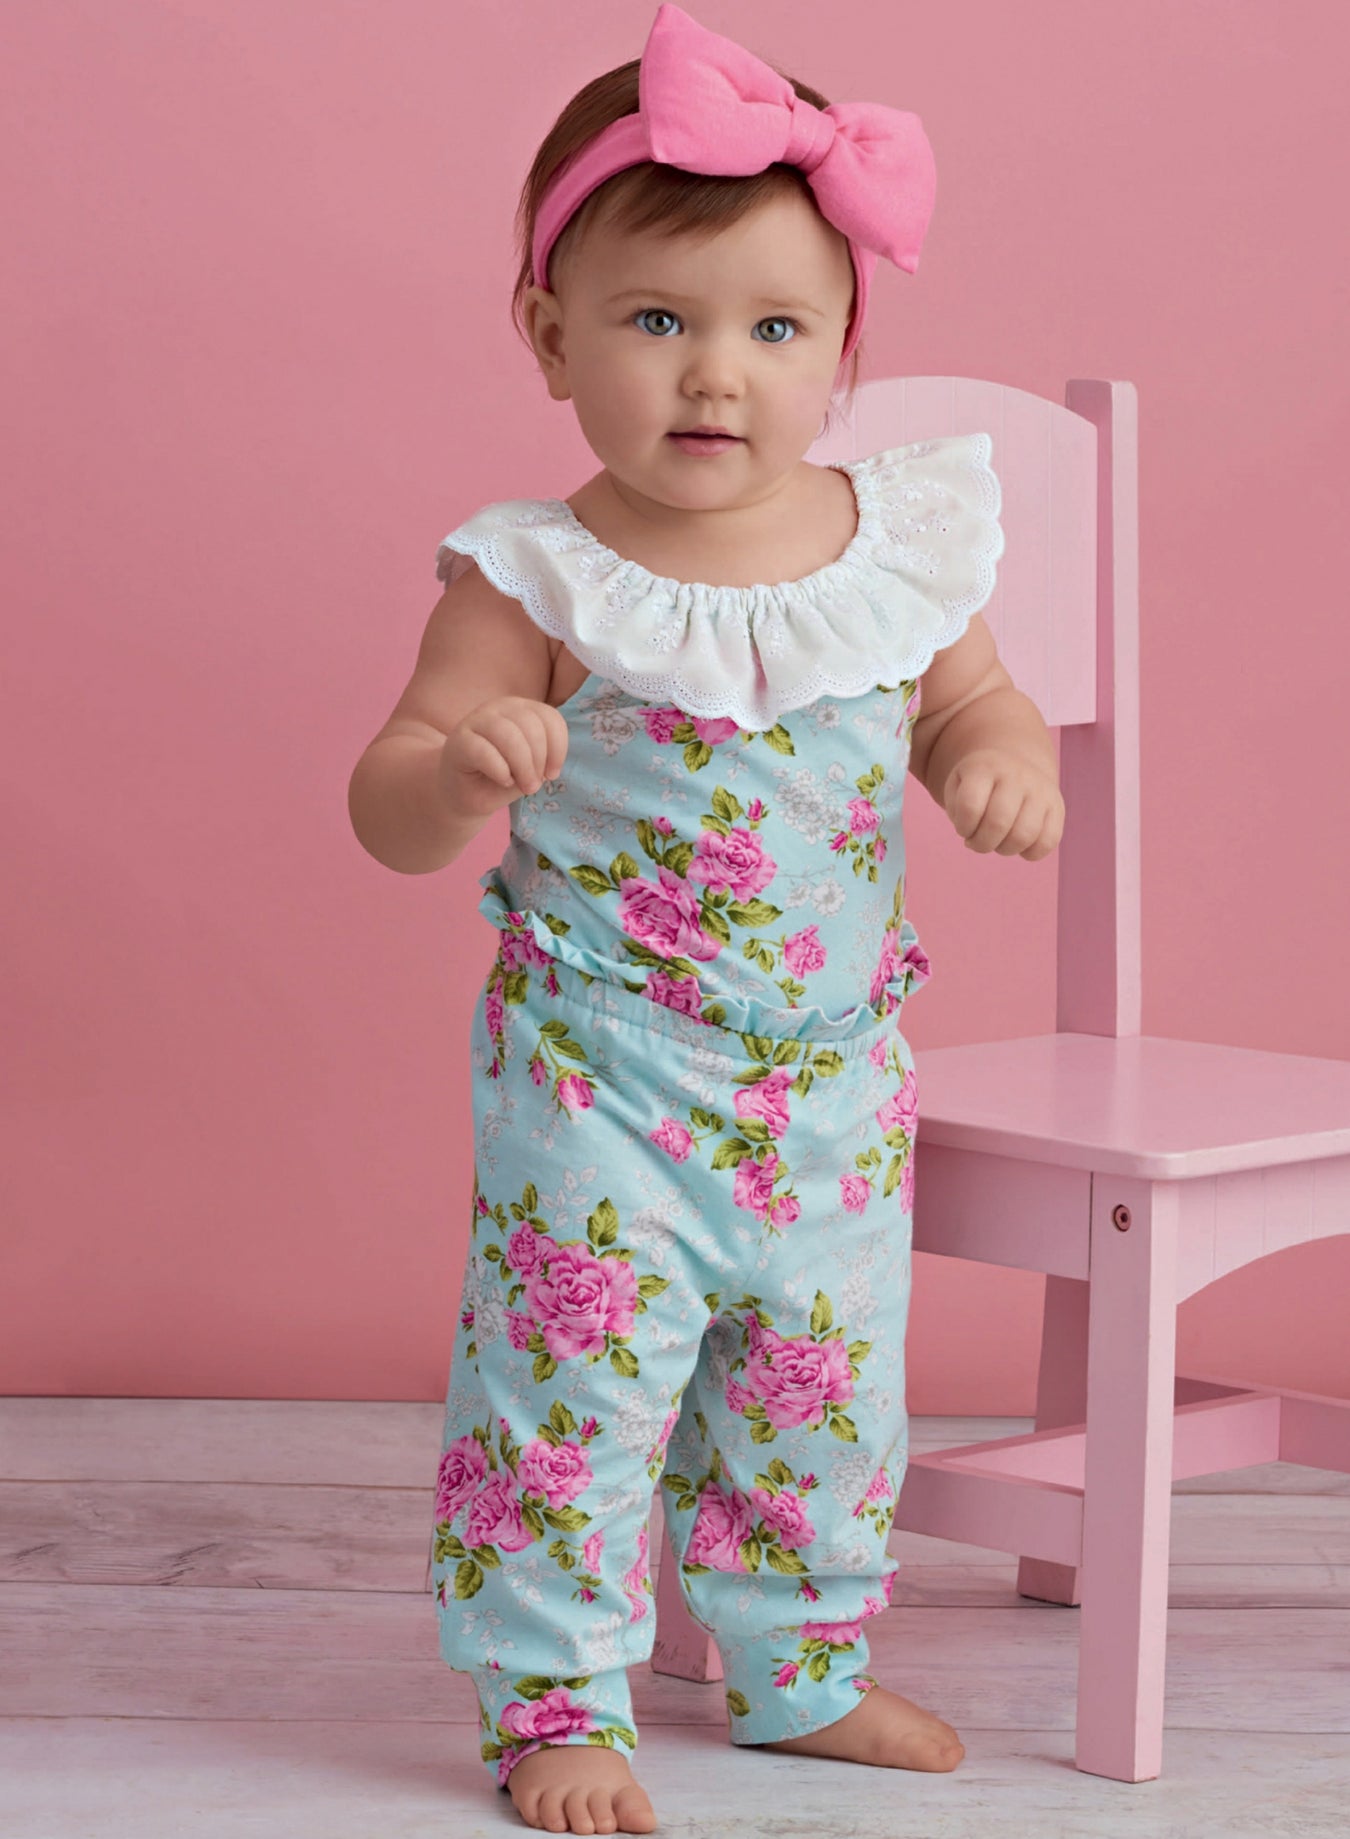 sewing patterns for adorable baby clothes at Jaycotts